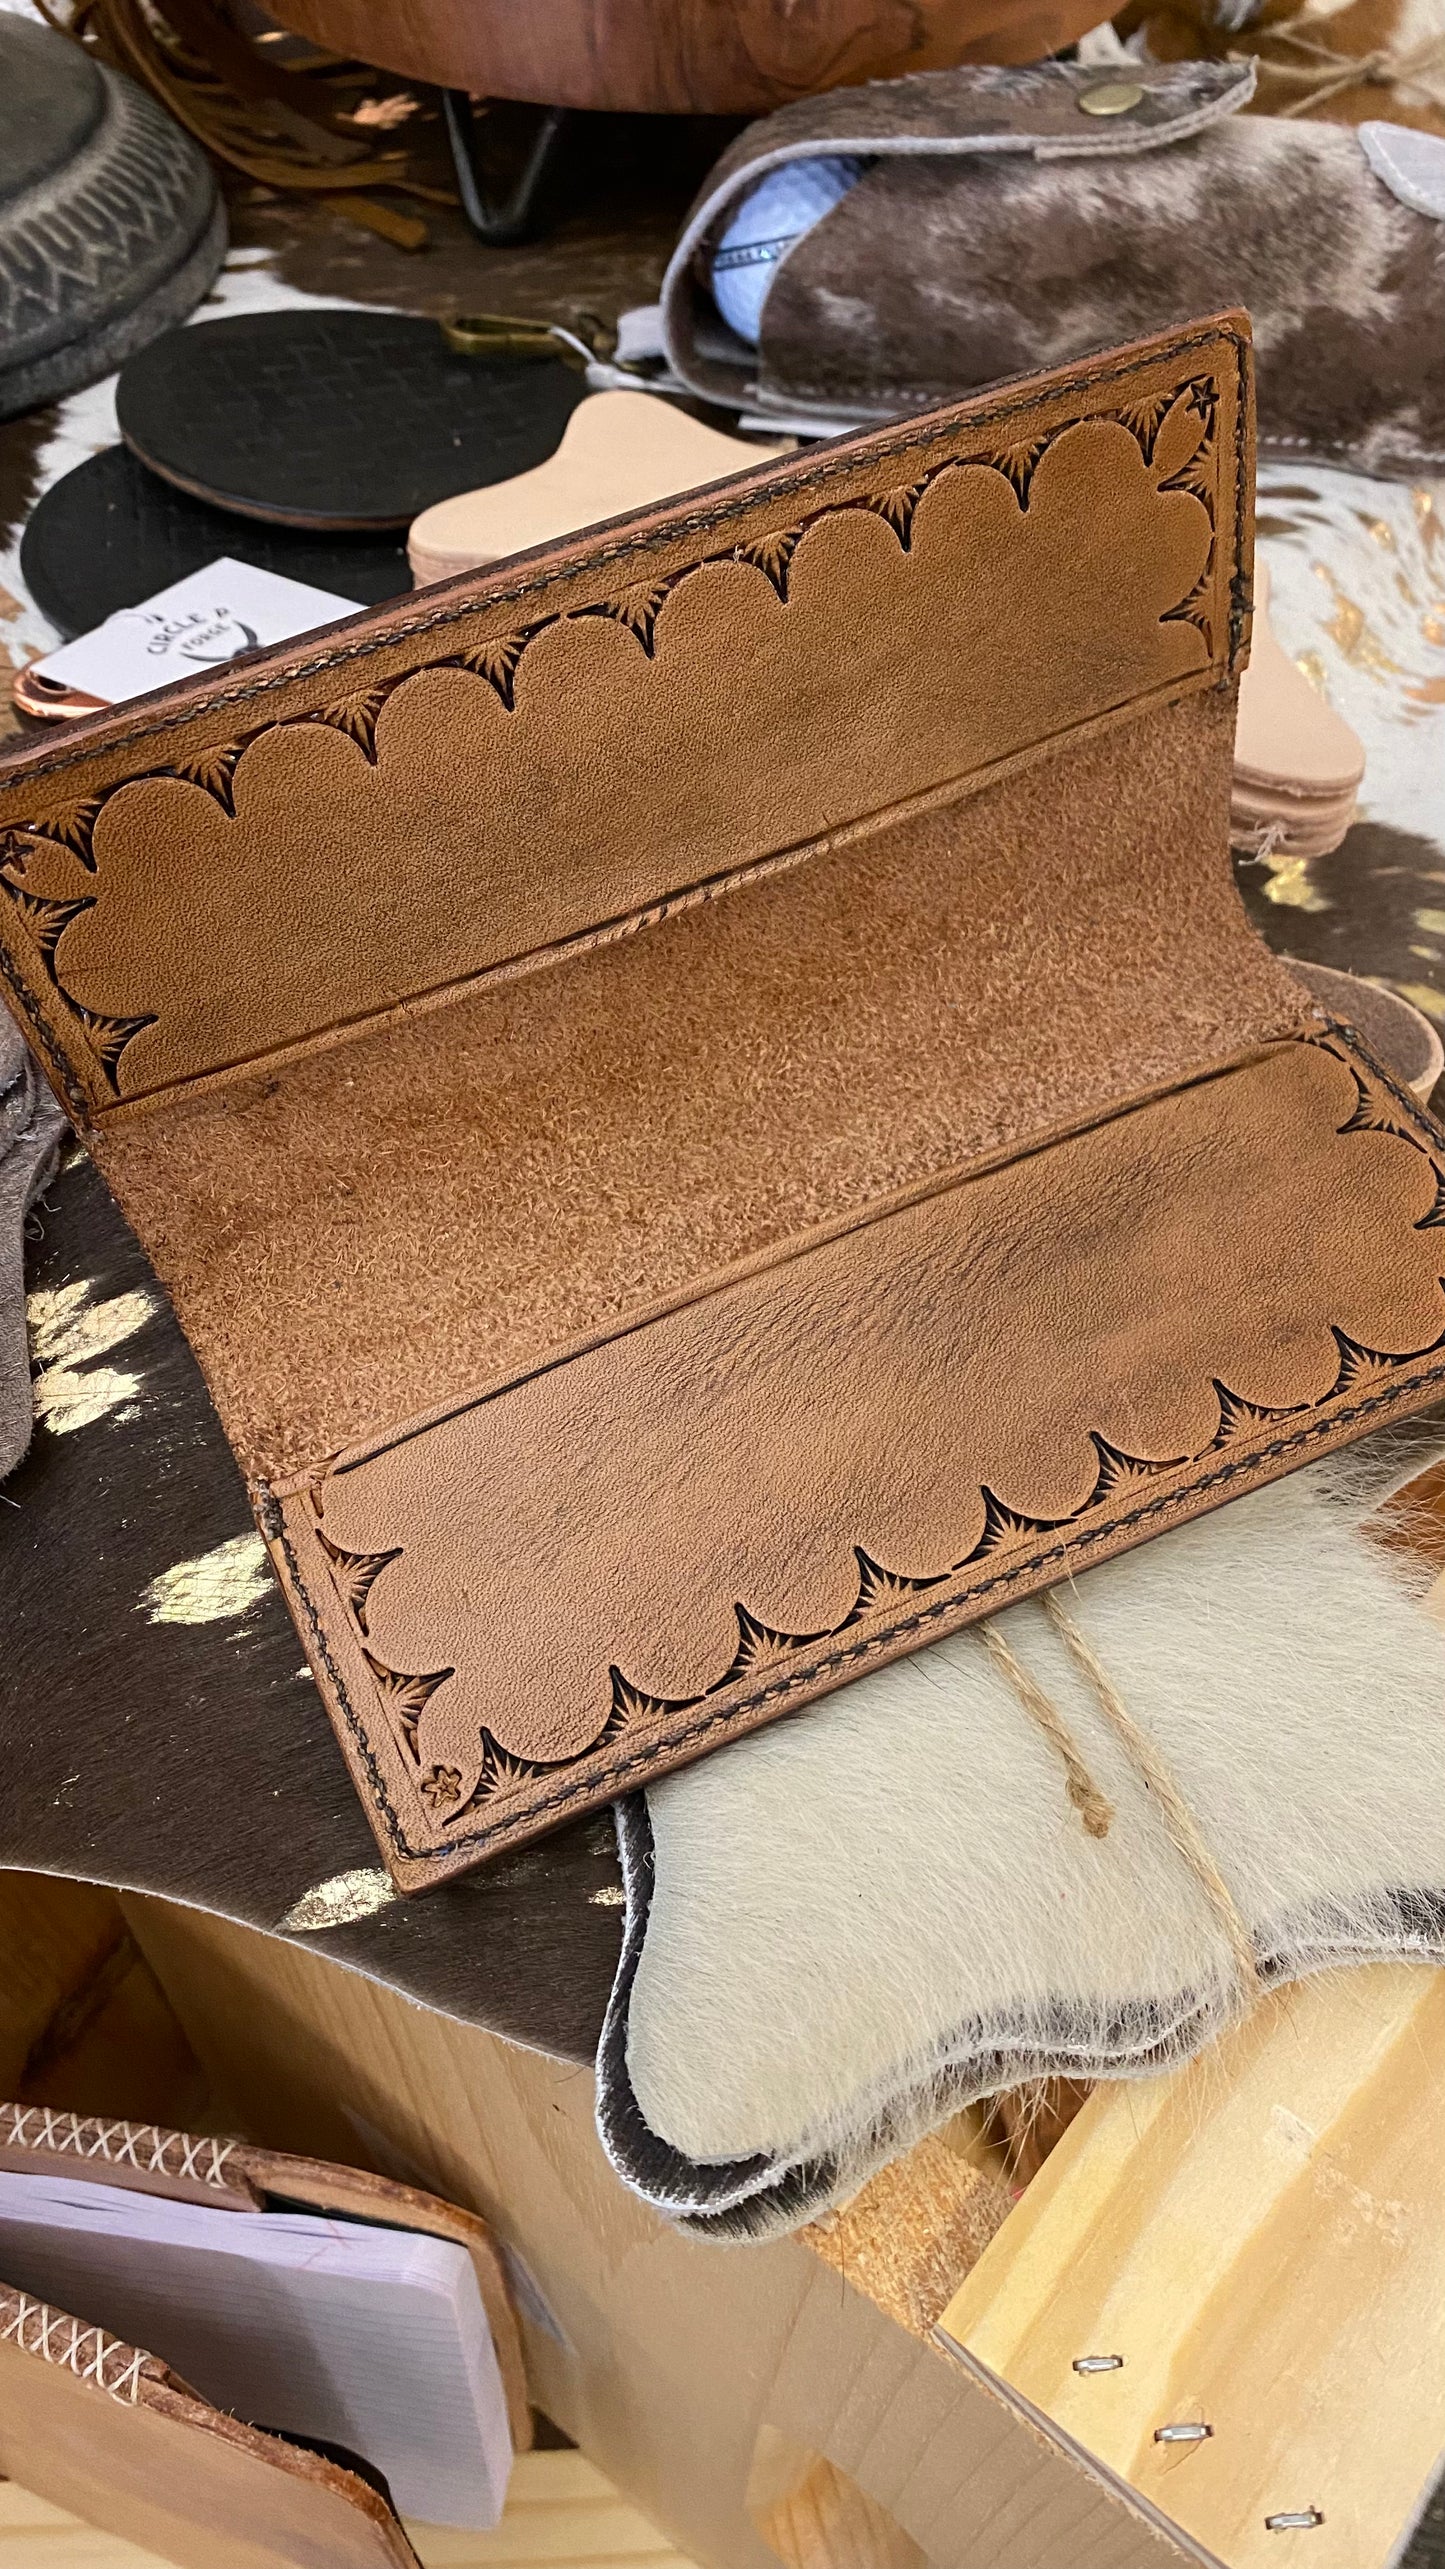 Checkbook Cover, hand-tooled